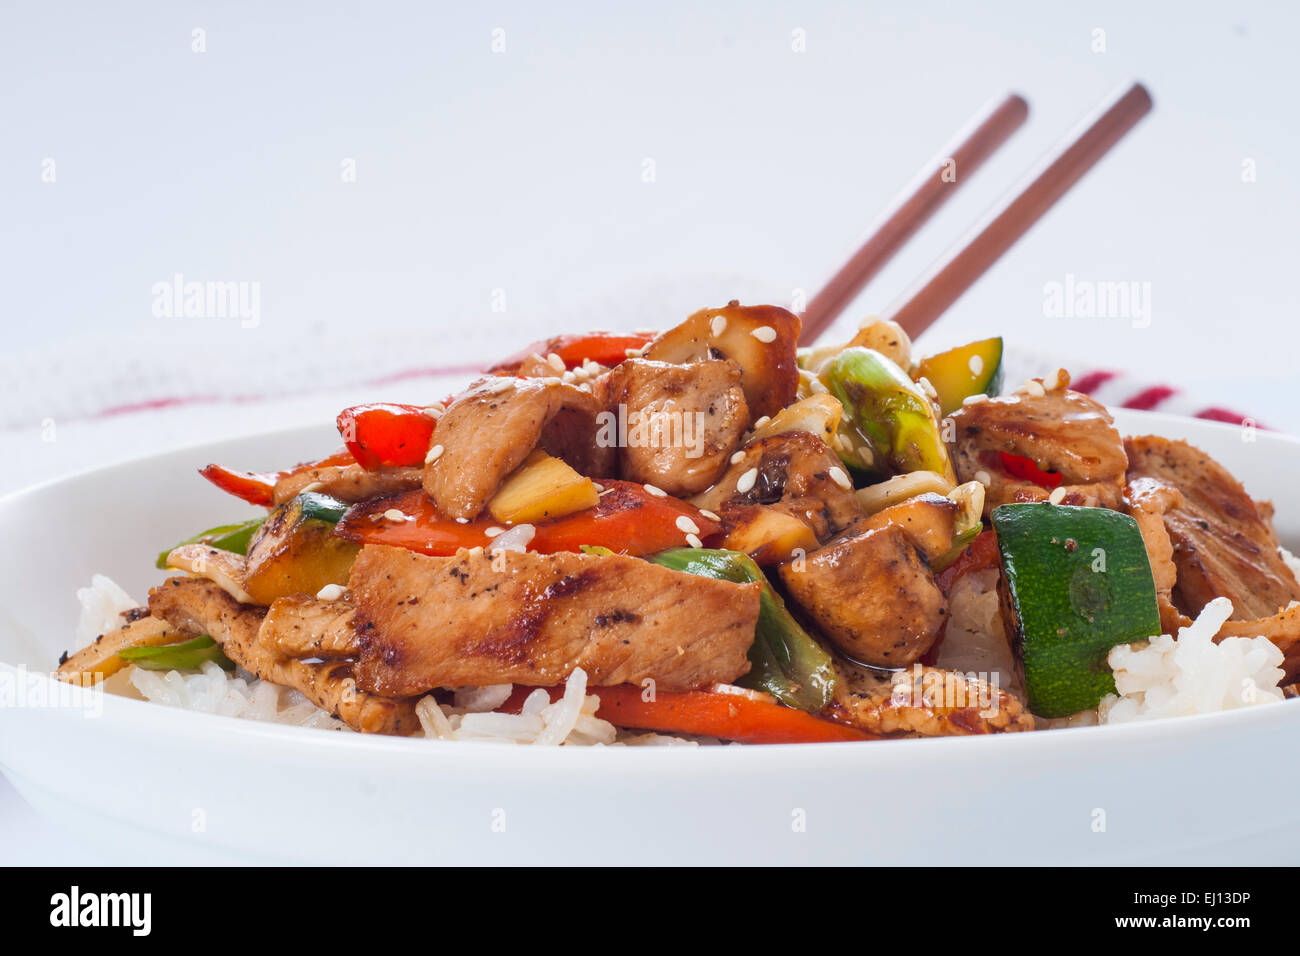 Bowl of homemade pork and stir fried vegetables on a bowl of white rice, with chopsticks Stock Photo